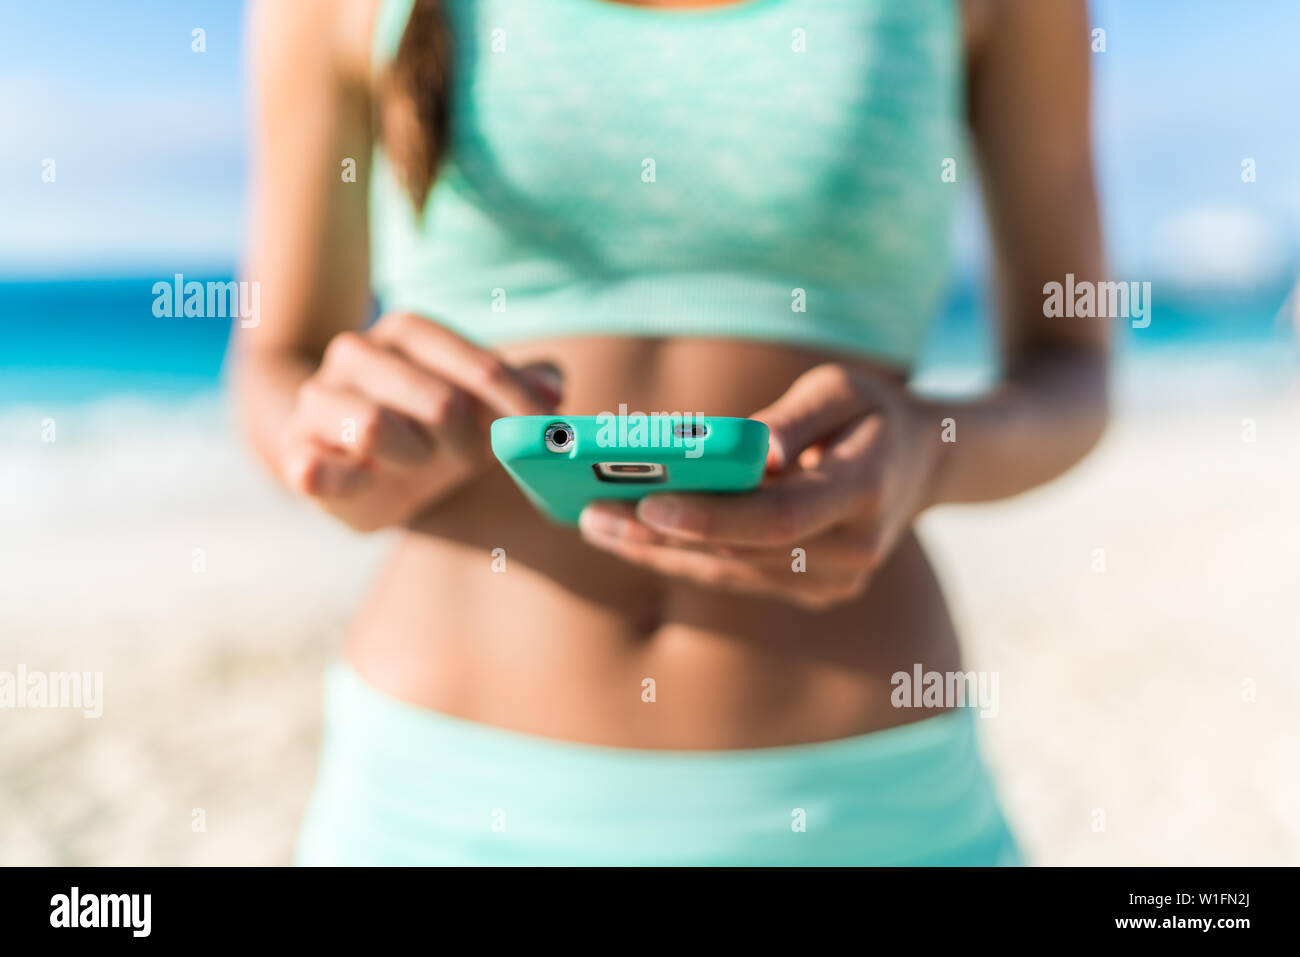 Athlete using mobile phone app fitness tracker for tracking weight loss progress during running exercise. Fit girl woman touching smartphone texting or playing online games or video workouts. Stock Photo